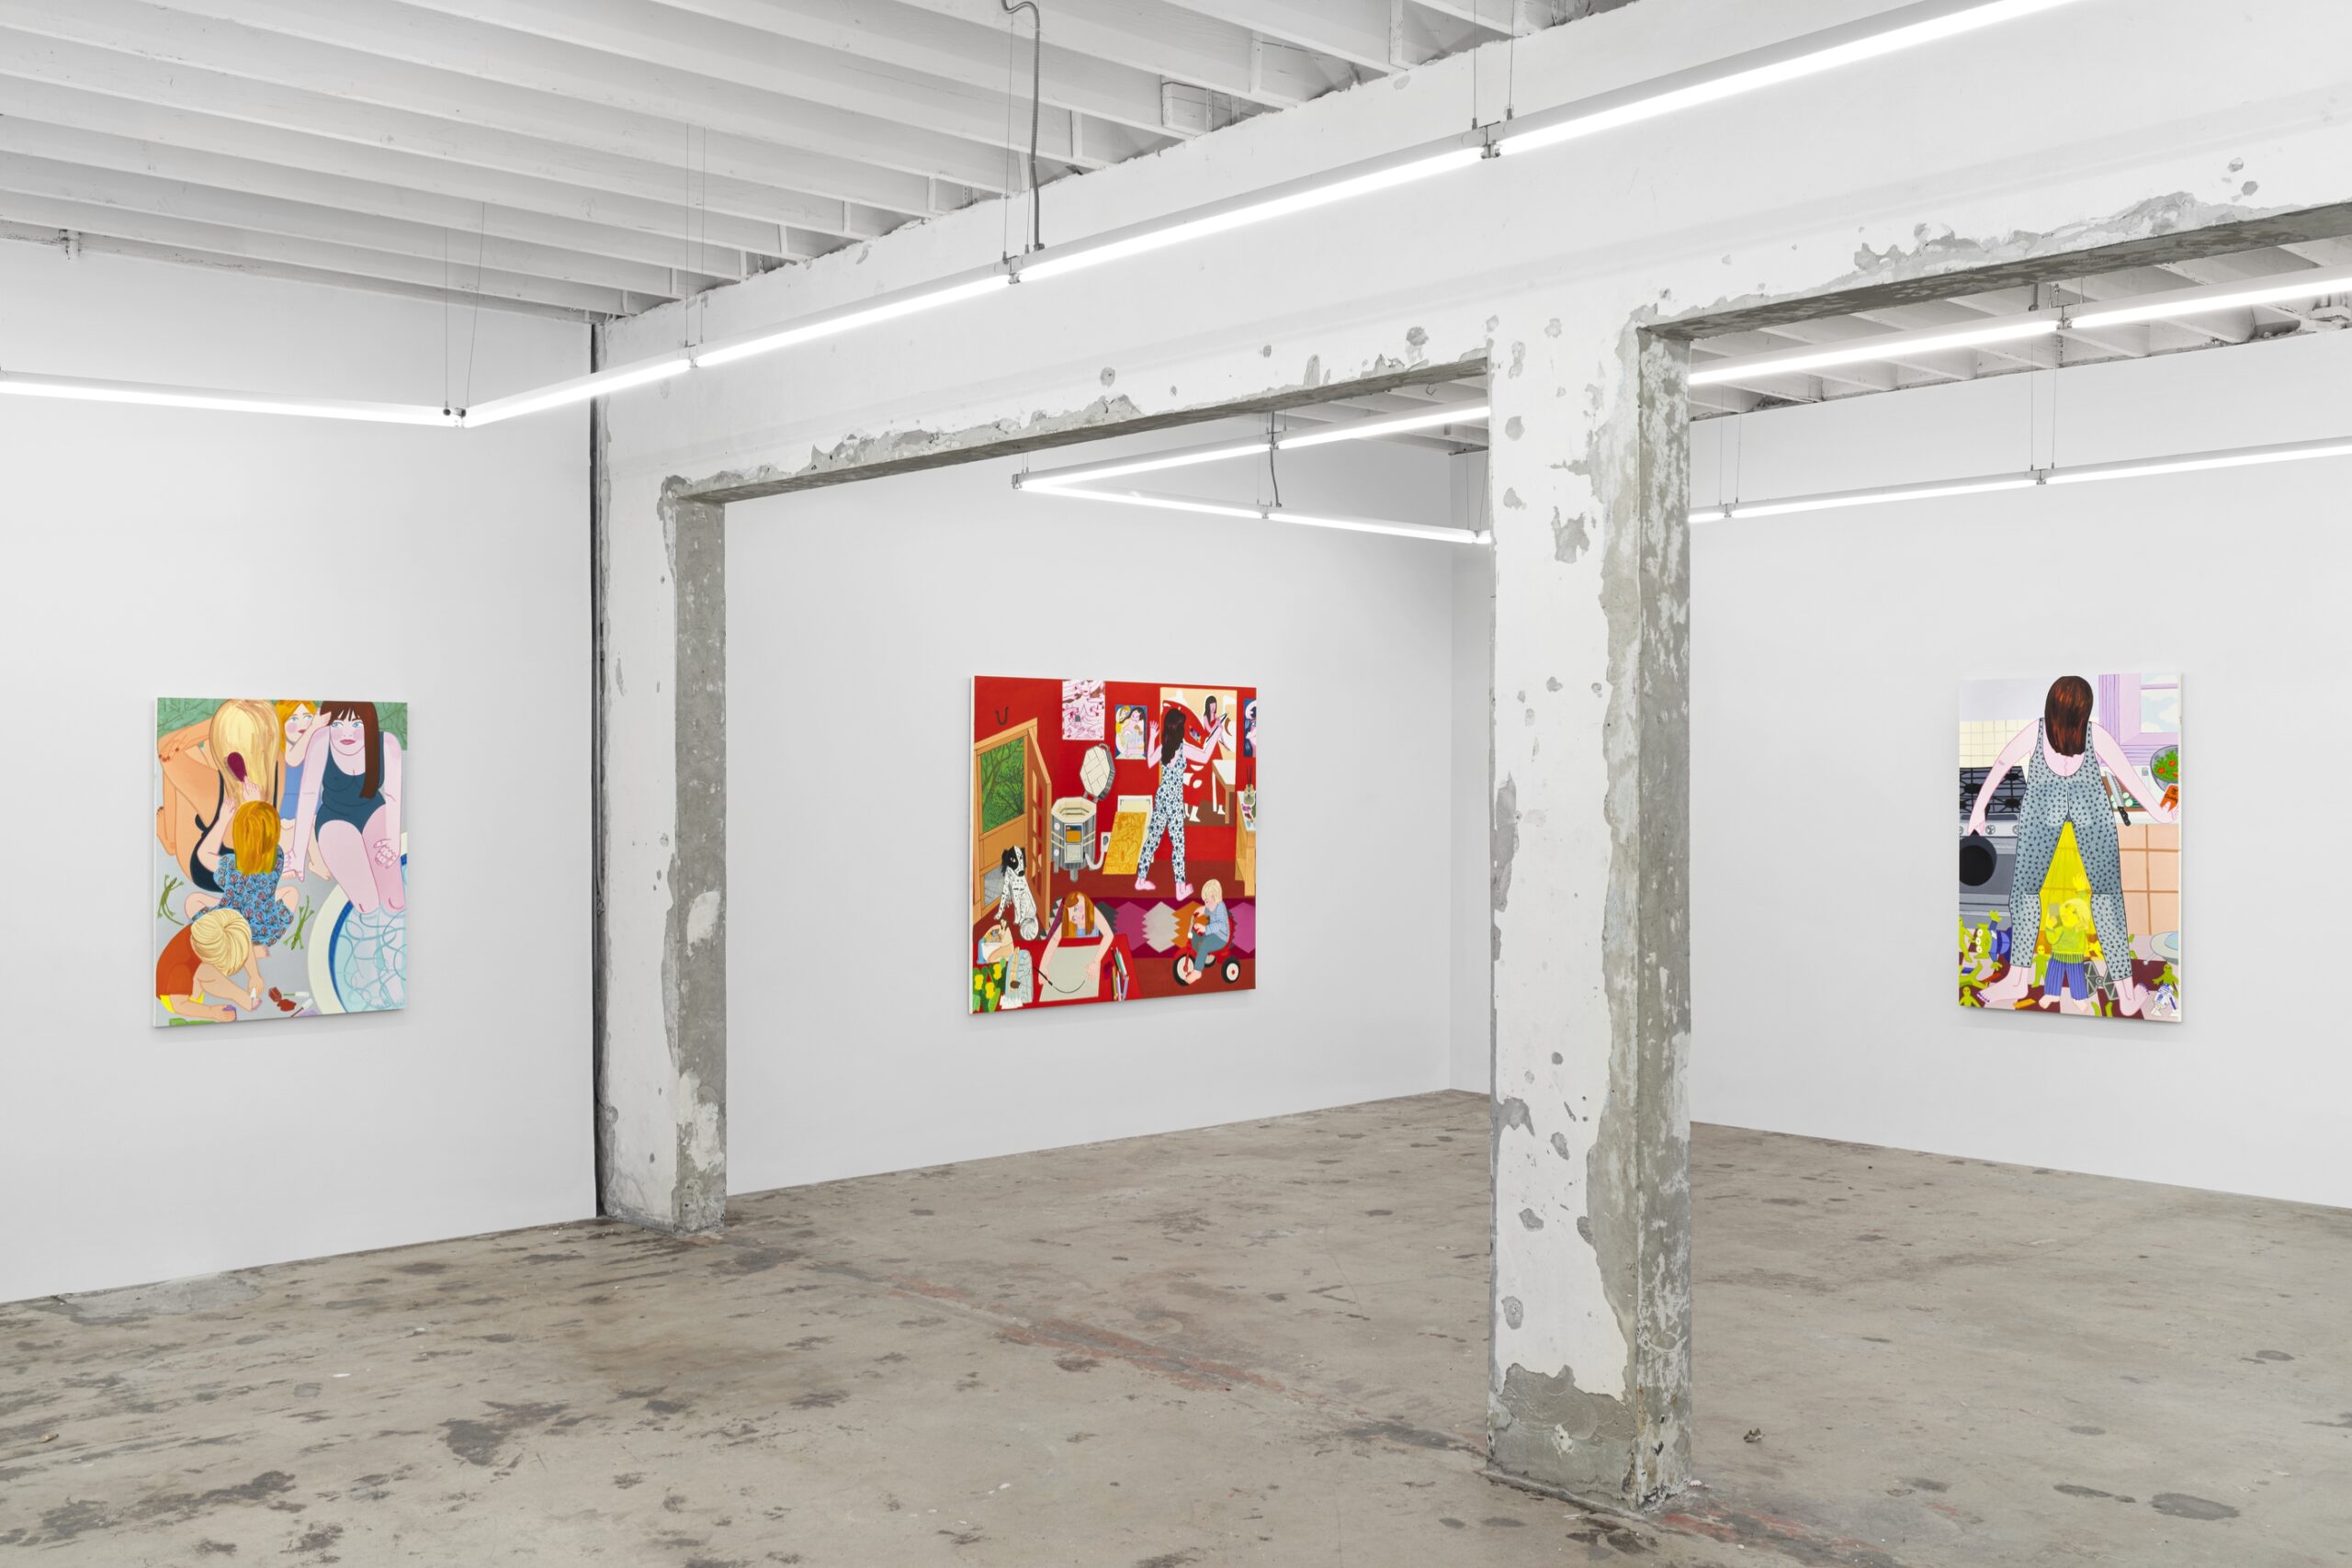 Installation view of Madeline Donahue: Present Tense on view in the Front Gallery. Photographed are oil on canvas paintings titled "Beam Me Up," "Red Studio," and "Hot Day."